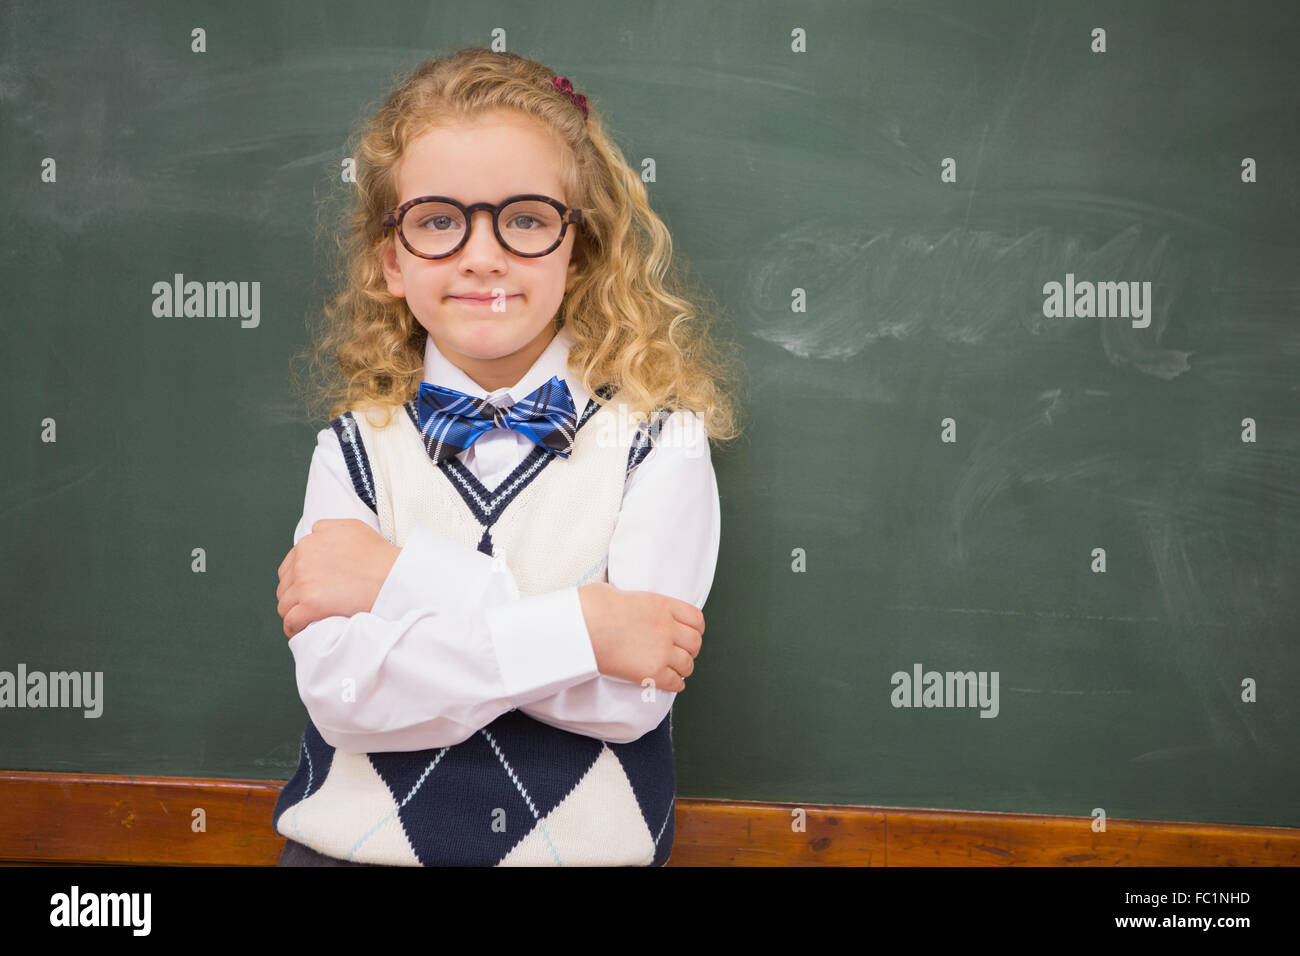 Perplex pupil looking at camera with arms crossed Stock Photo